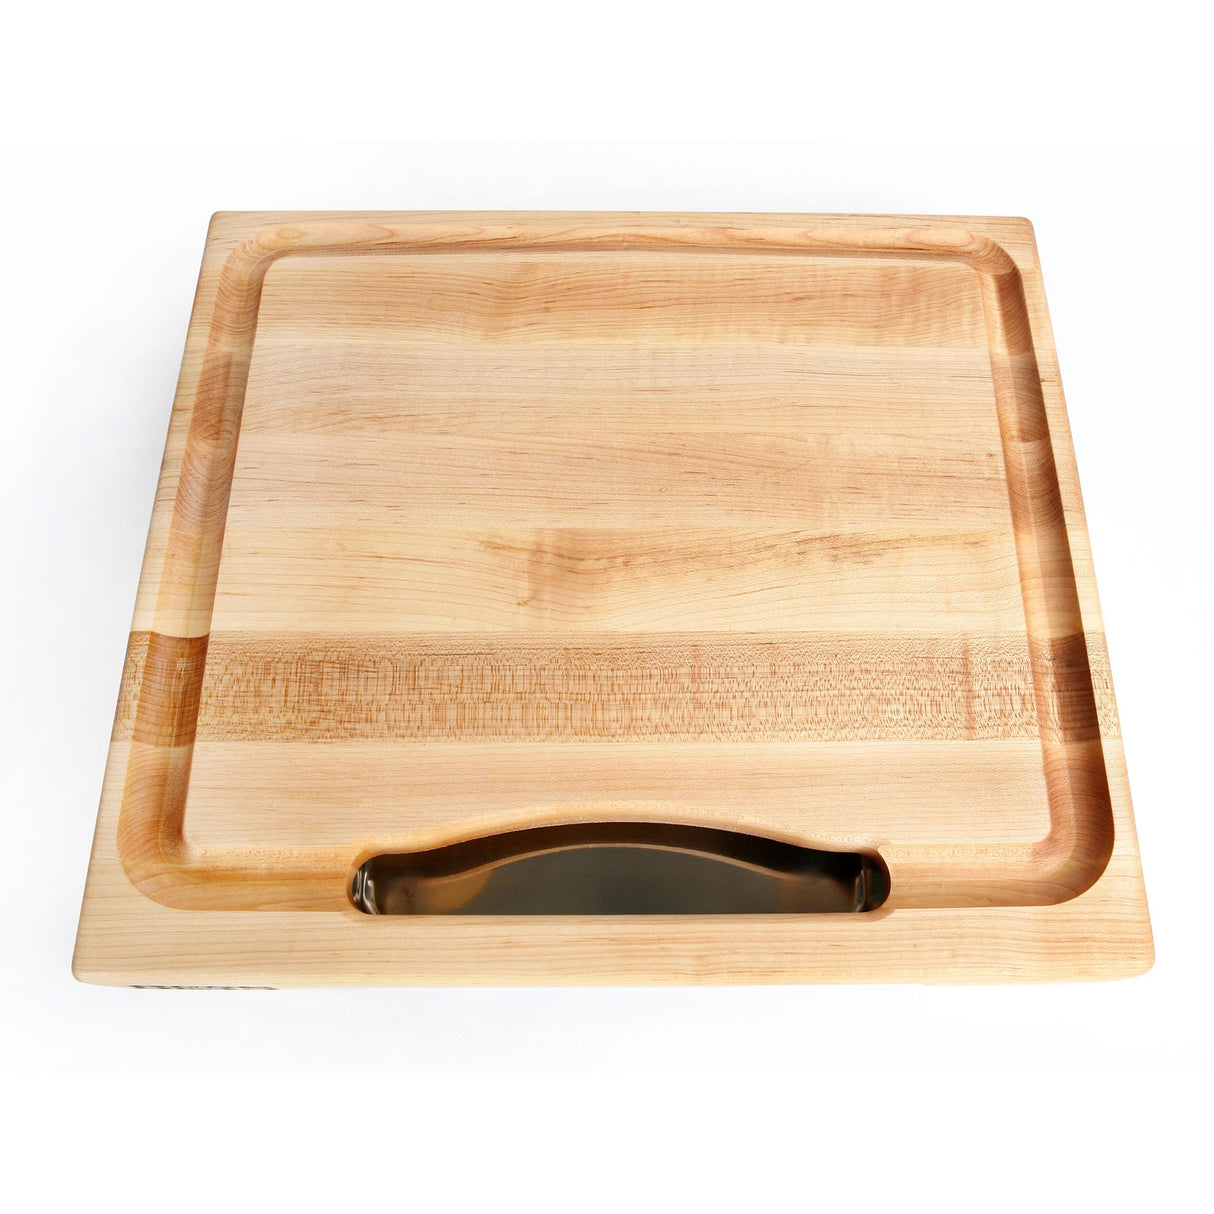 John Boos PM1514225-P Newton Prep Master Large Maple Wood Cutting Board for Kitchen, 15 Inches x 14 Inches, 2.25 Thick Reversible Edge Grain with Juice Groove & Stainless Pan 15X14X2.25 MPL-EDGE GR-PREP MASTER-